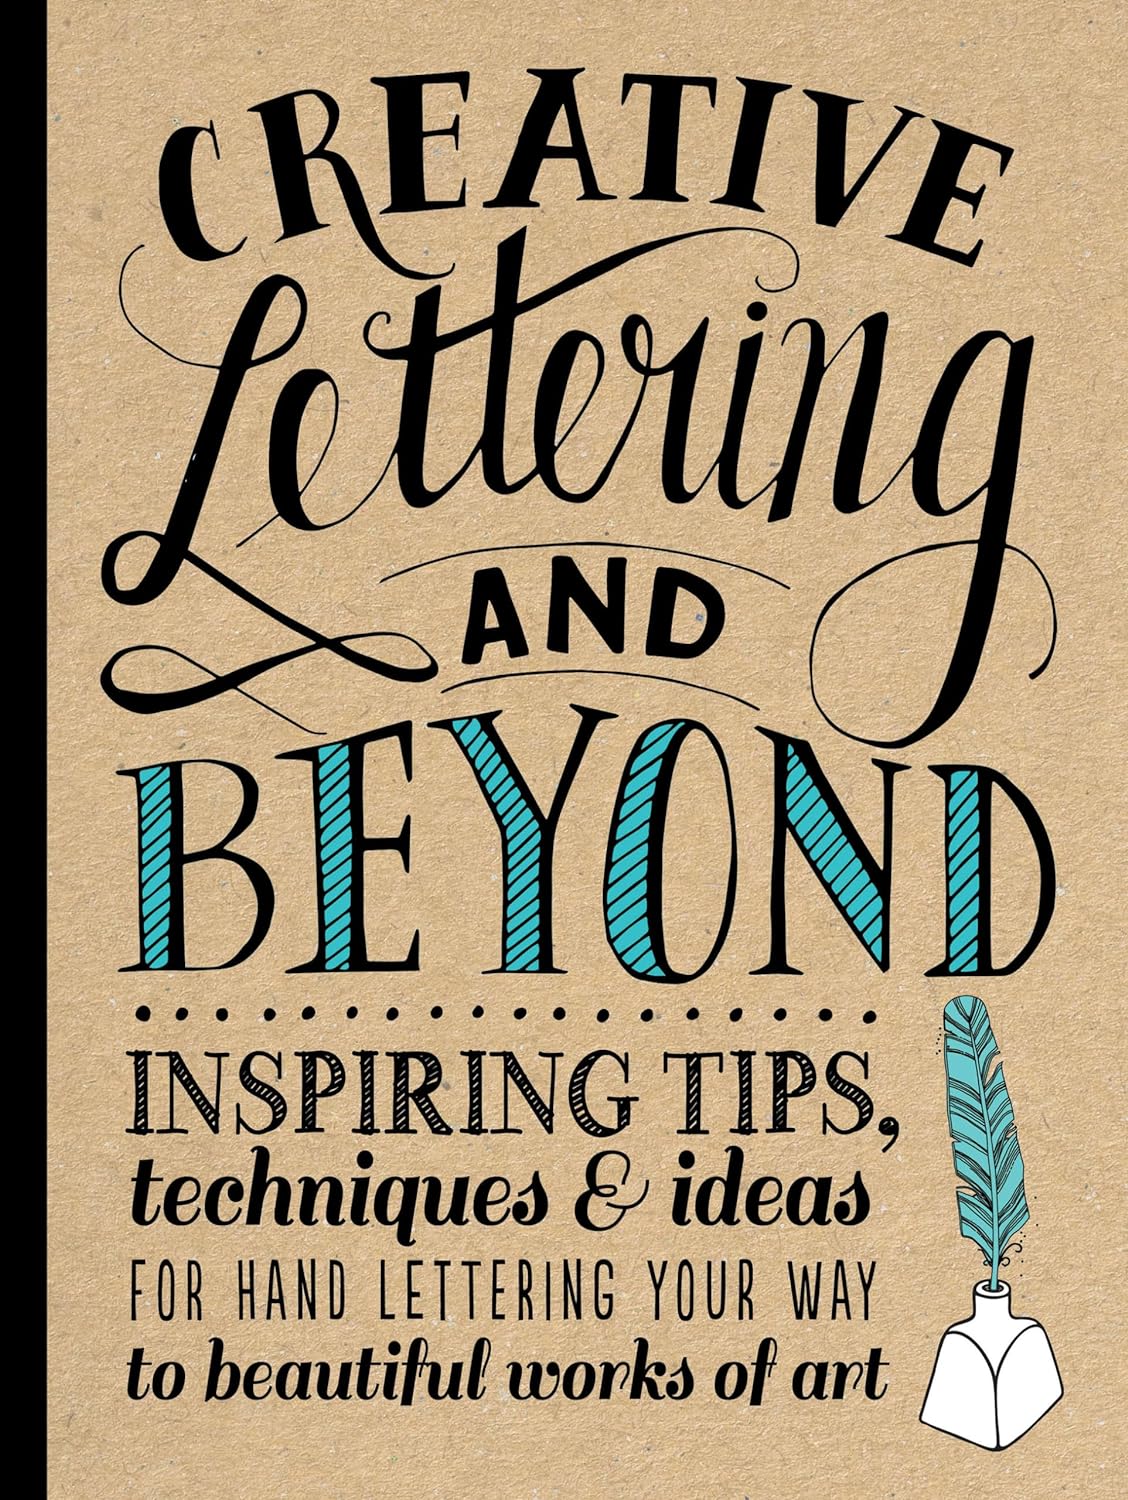 Creative Lettering & Beyond